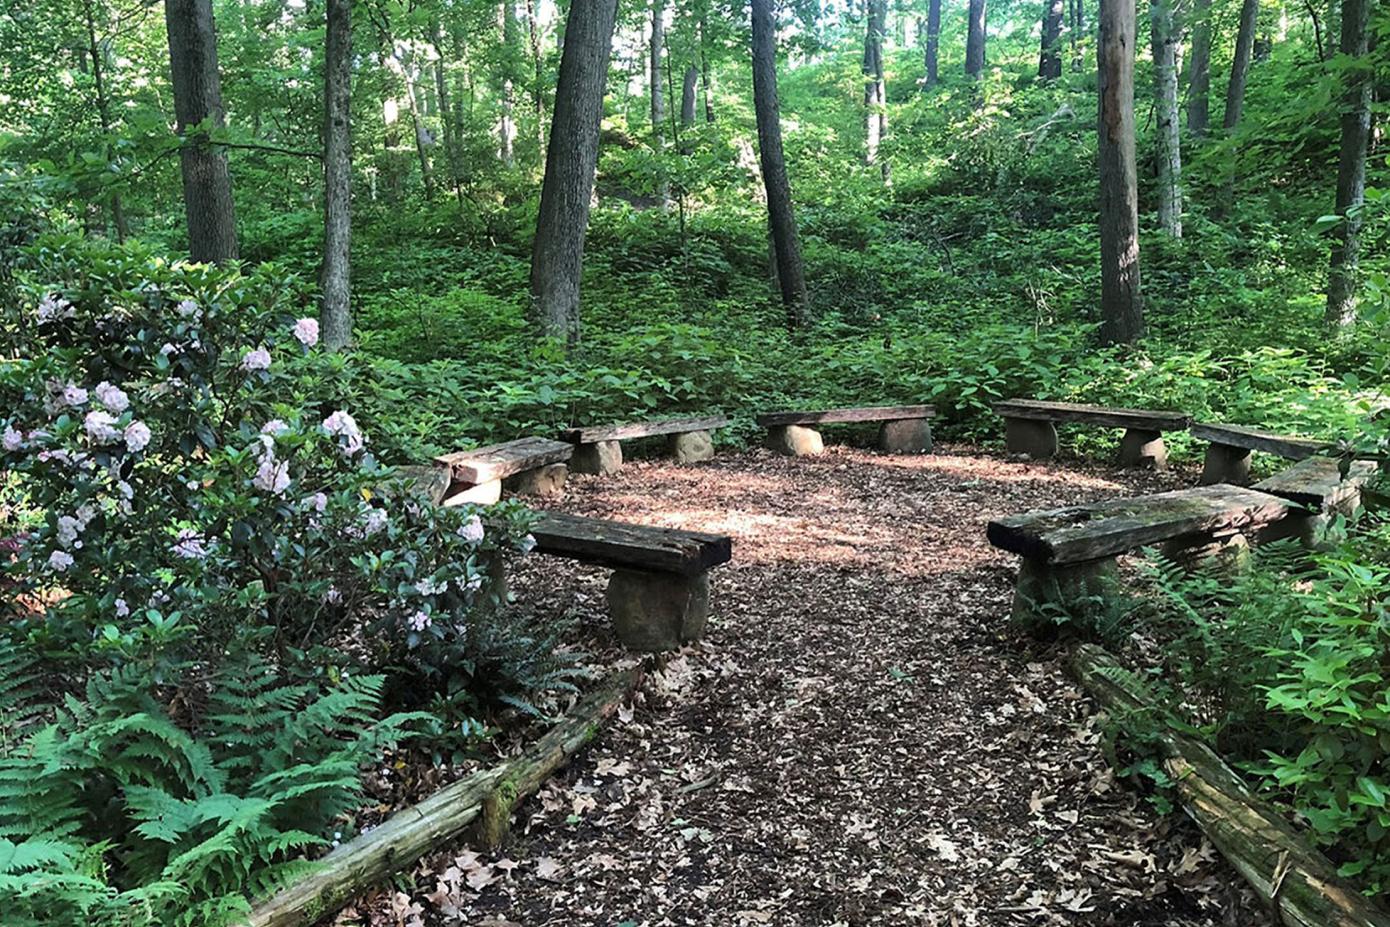 A circle of wooden benches in the forest